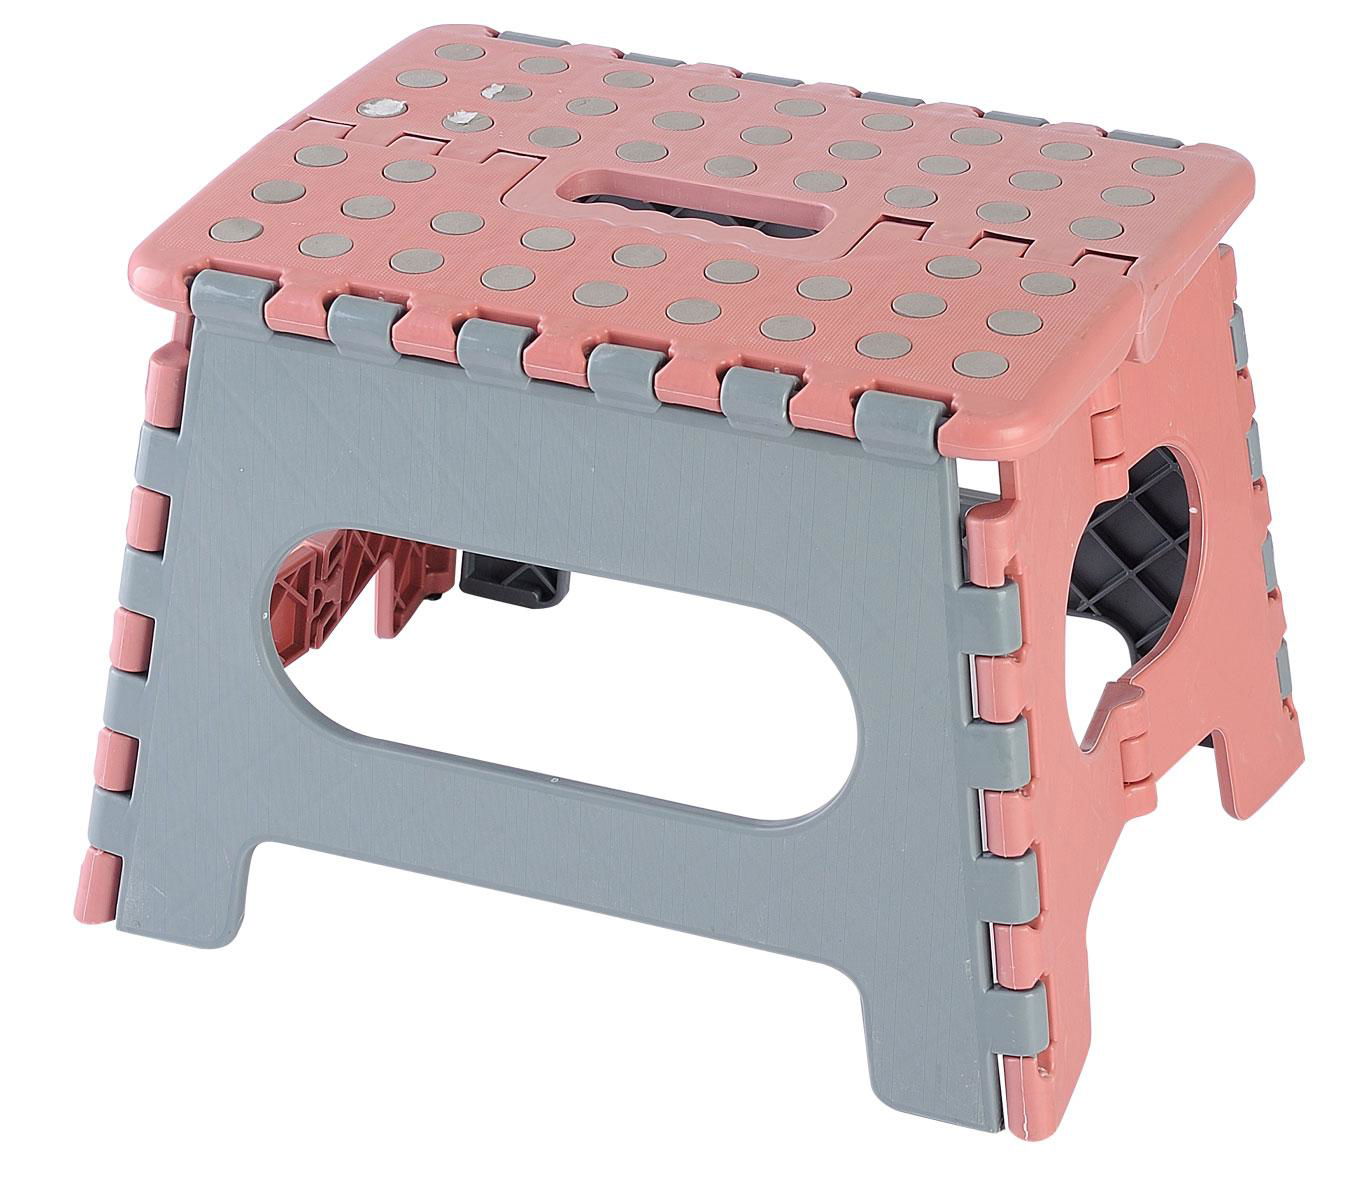 Plastic folding stool for kitchen bathroom and bedroom 